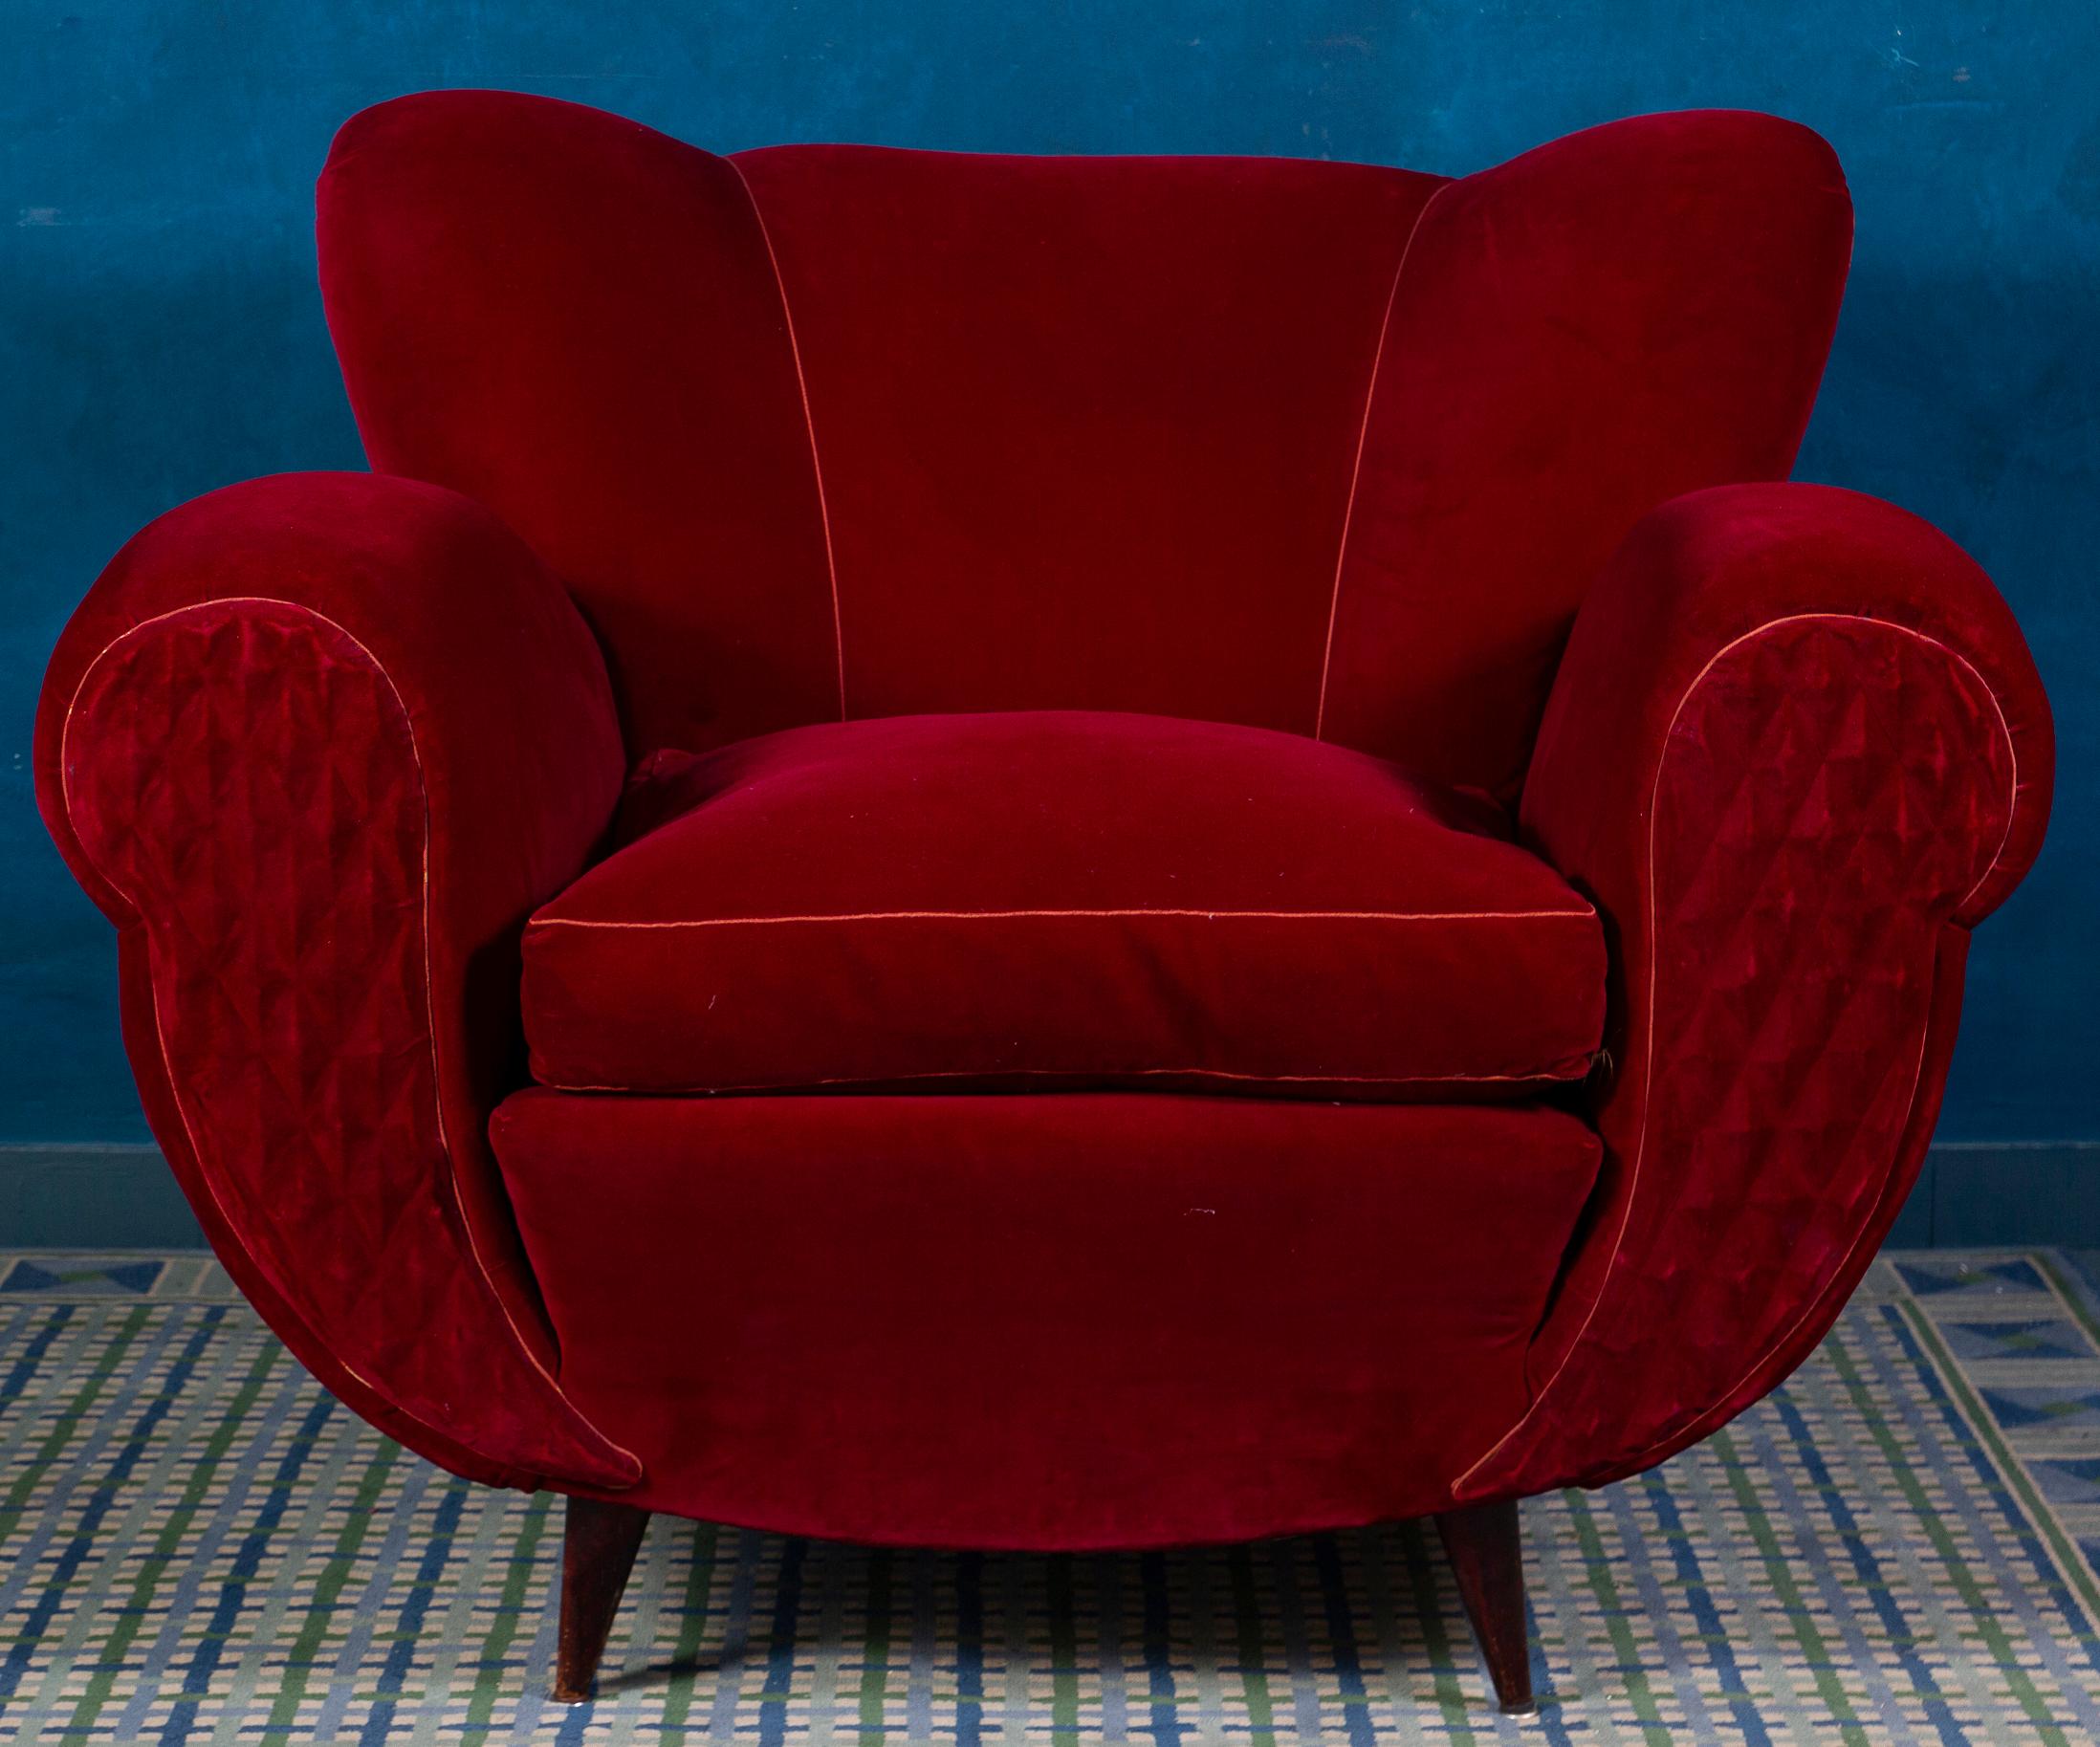 Very comfortable pair tulip shape red velvet of armchairs with scrolled hand holds .
 Soft and beautiful original vintage red velvet upholstery. The conical legs are in original condition. These elegant silhouette lounge chairs would compliment